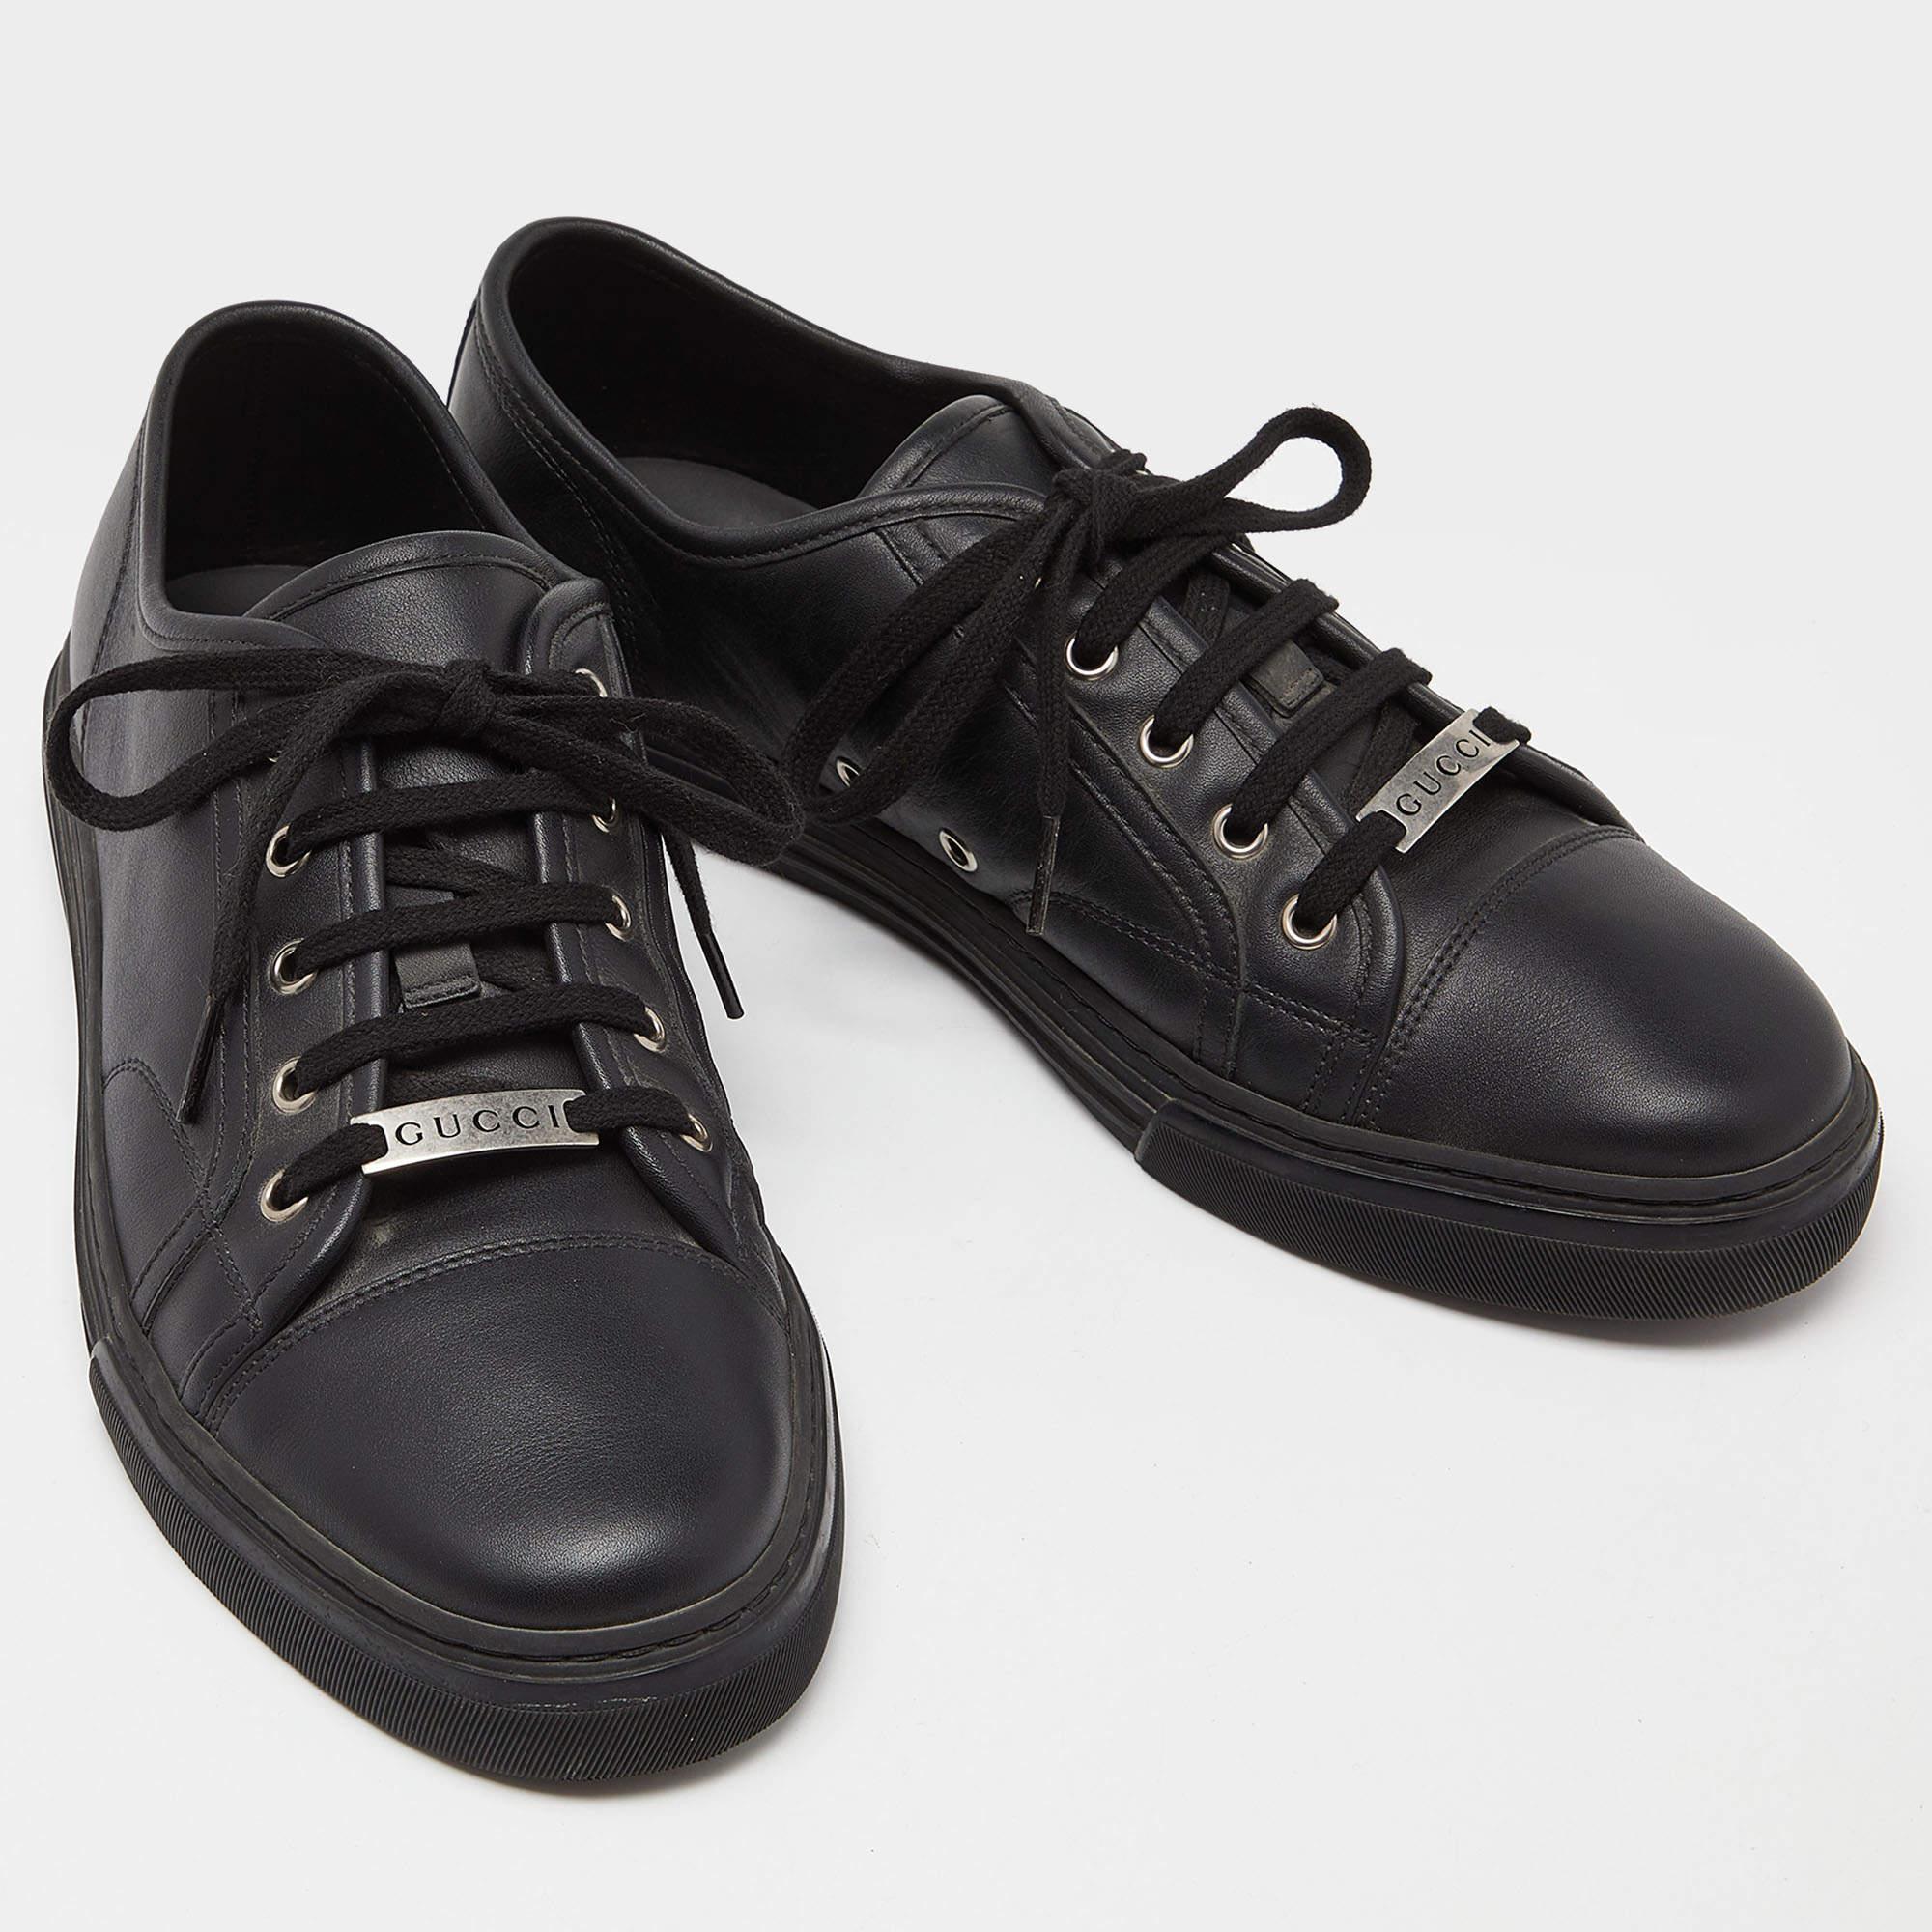 Gucci Black Leather Low Top Sneakers Size 43 4